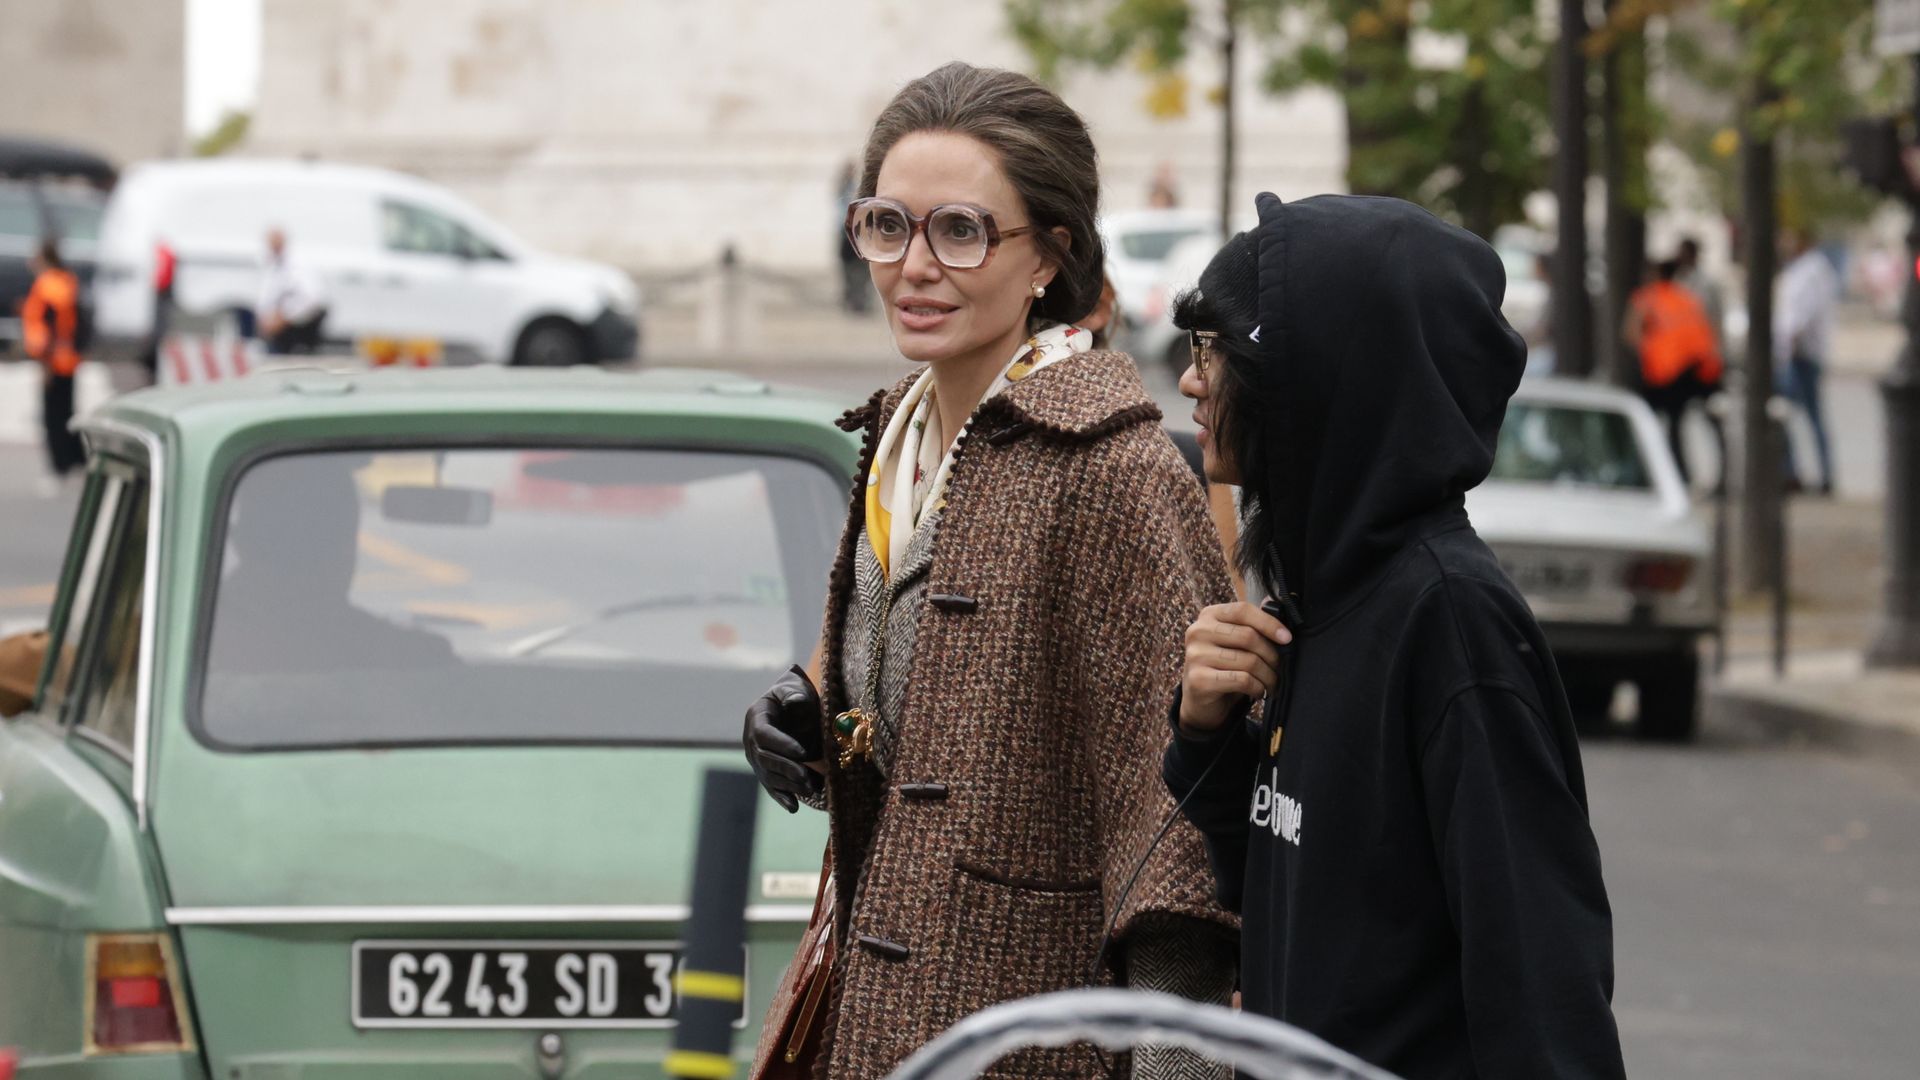 PARIS, FRANCE - OCTOBER 12: Angelina Jolie is seen filming "Maria" on October 12, 2023 in Paris, France. (Photo by MEGA/GC Images)